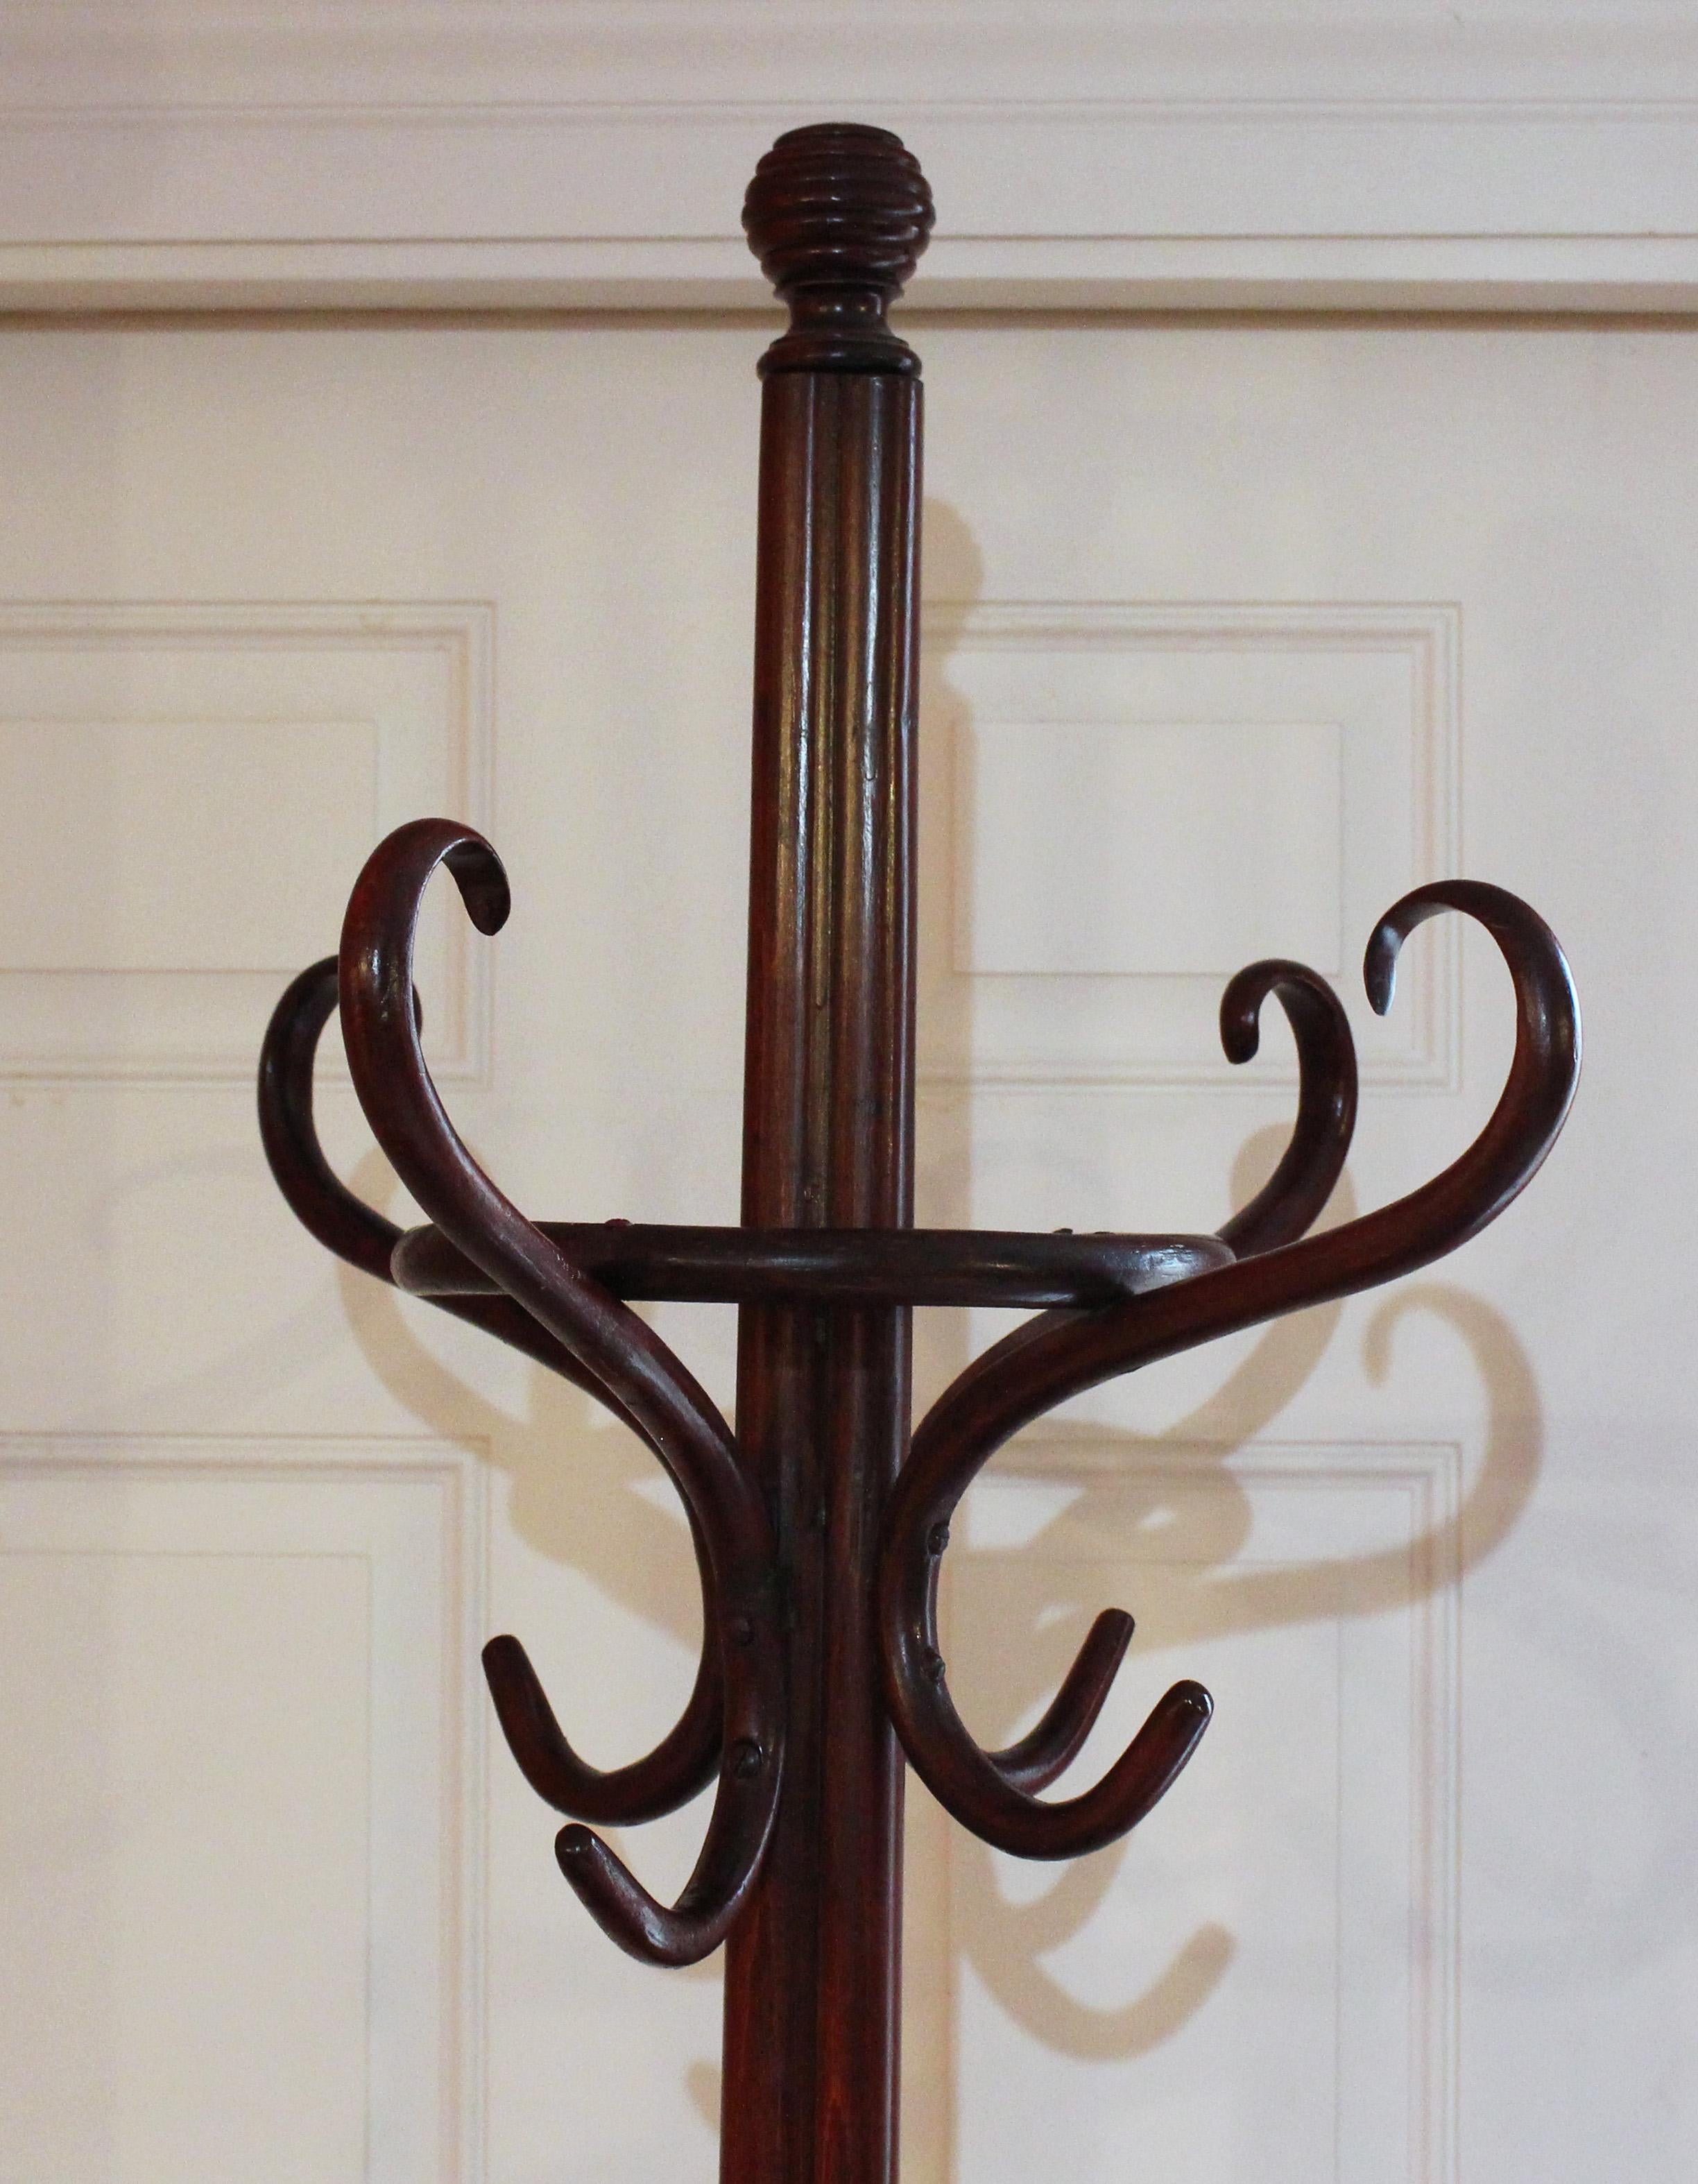 Circa 1900 bentwood hall tree, Art Nouveau, French. Central cluster column with beehive turned finial. Four 